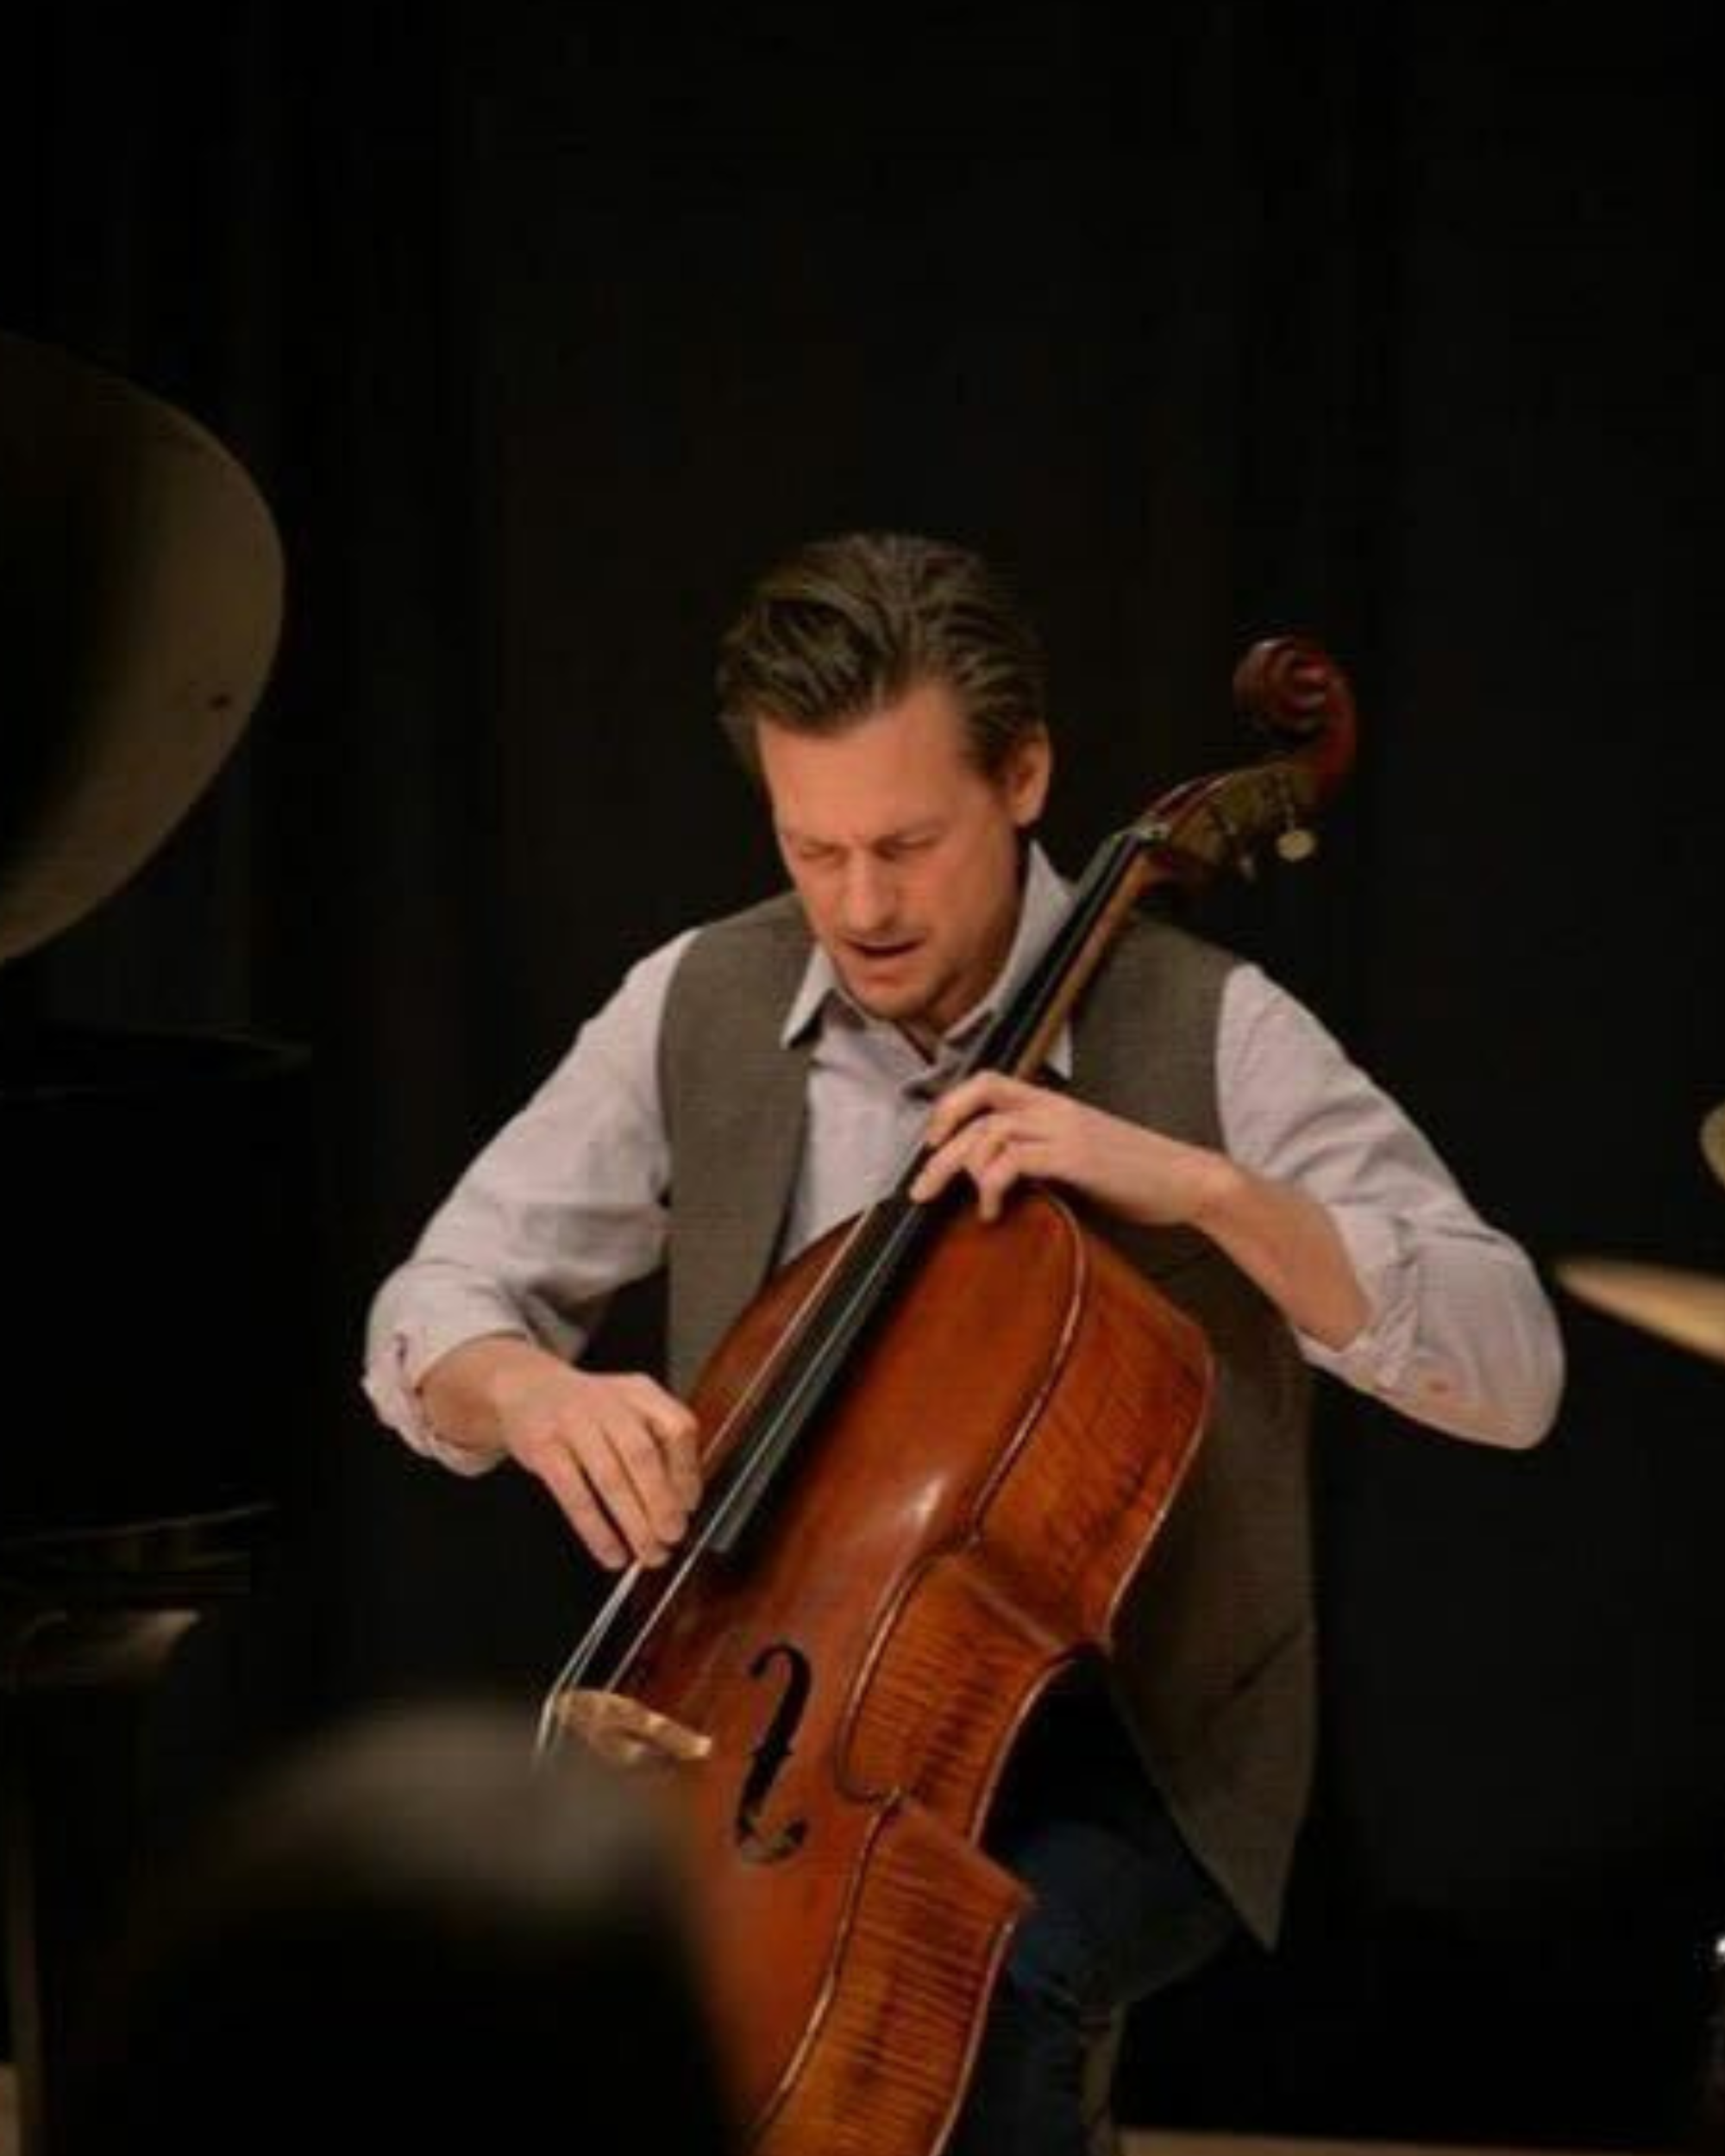 Simon Fisk playing upright bass with his eyes closed.